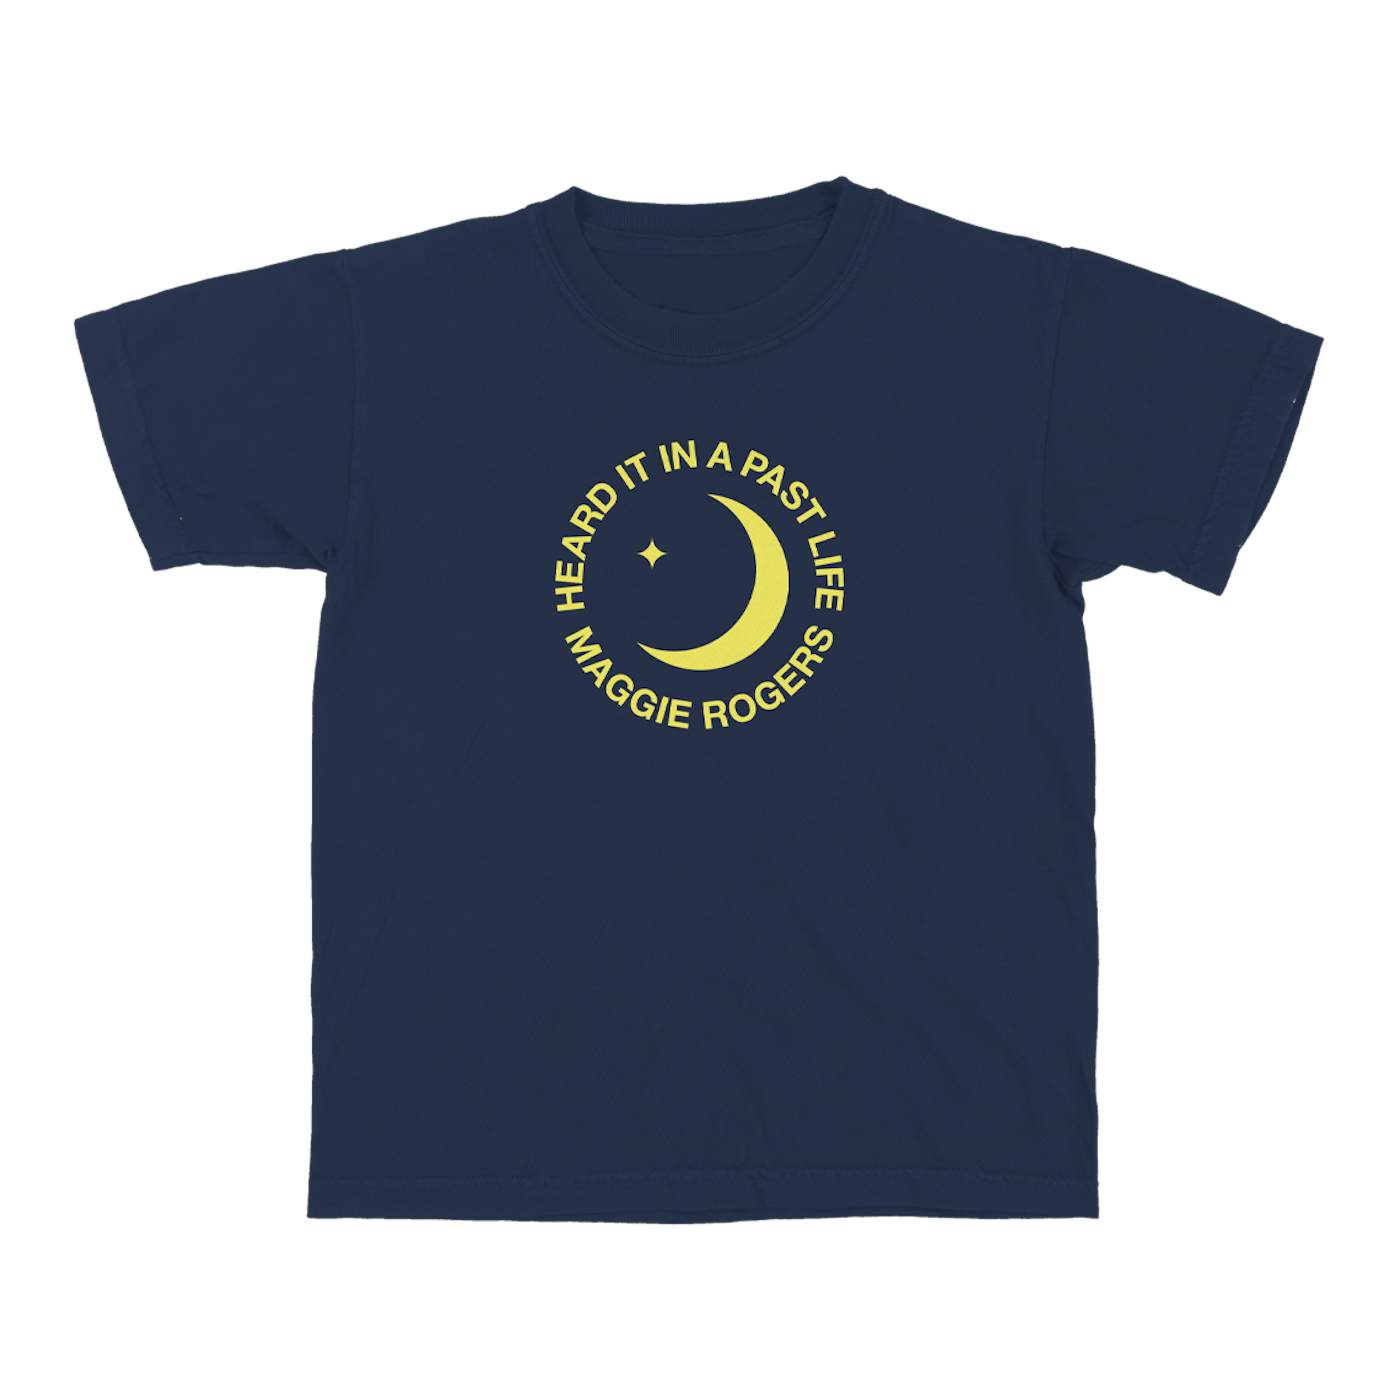 Maggie Rogers HIIAPL Moon Youth T-Shirt (LOW STOCK)